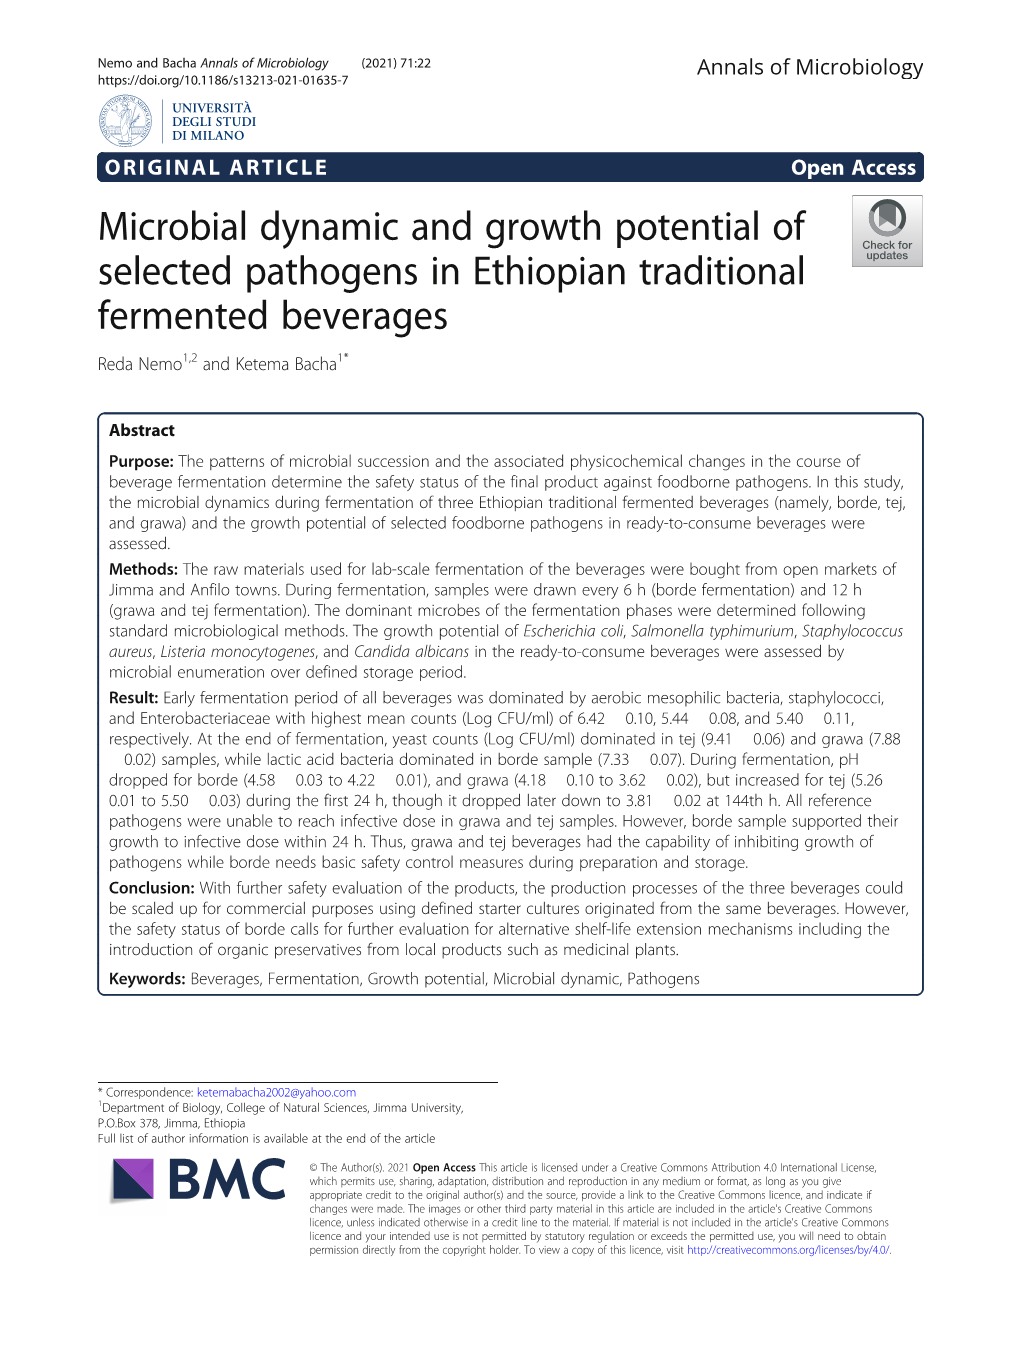 Microbial Dynamic and Growth Potential of Selected Pathogens in Ethiopian Traditional Fermented Beverages Reda Nemo1,2 and Ketema Bacha1*